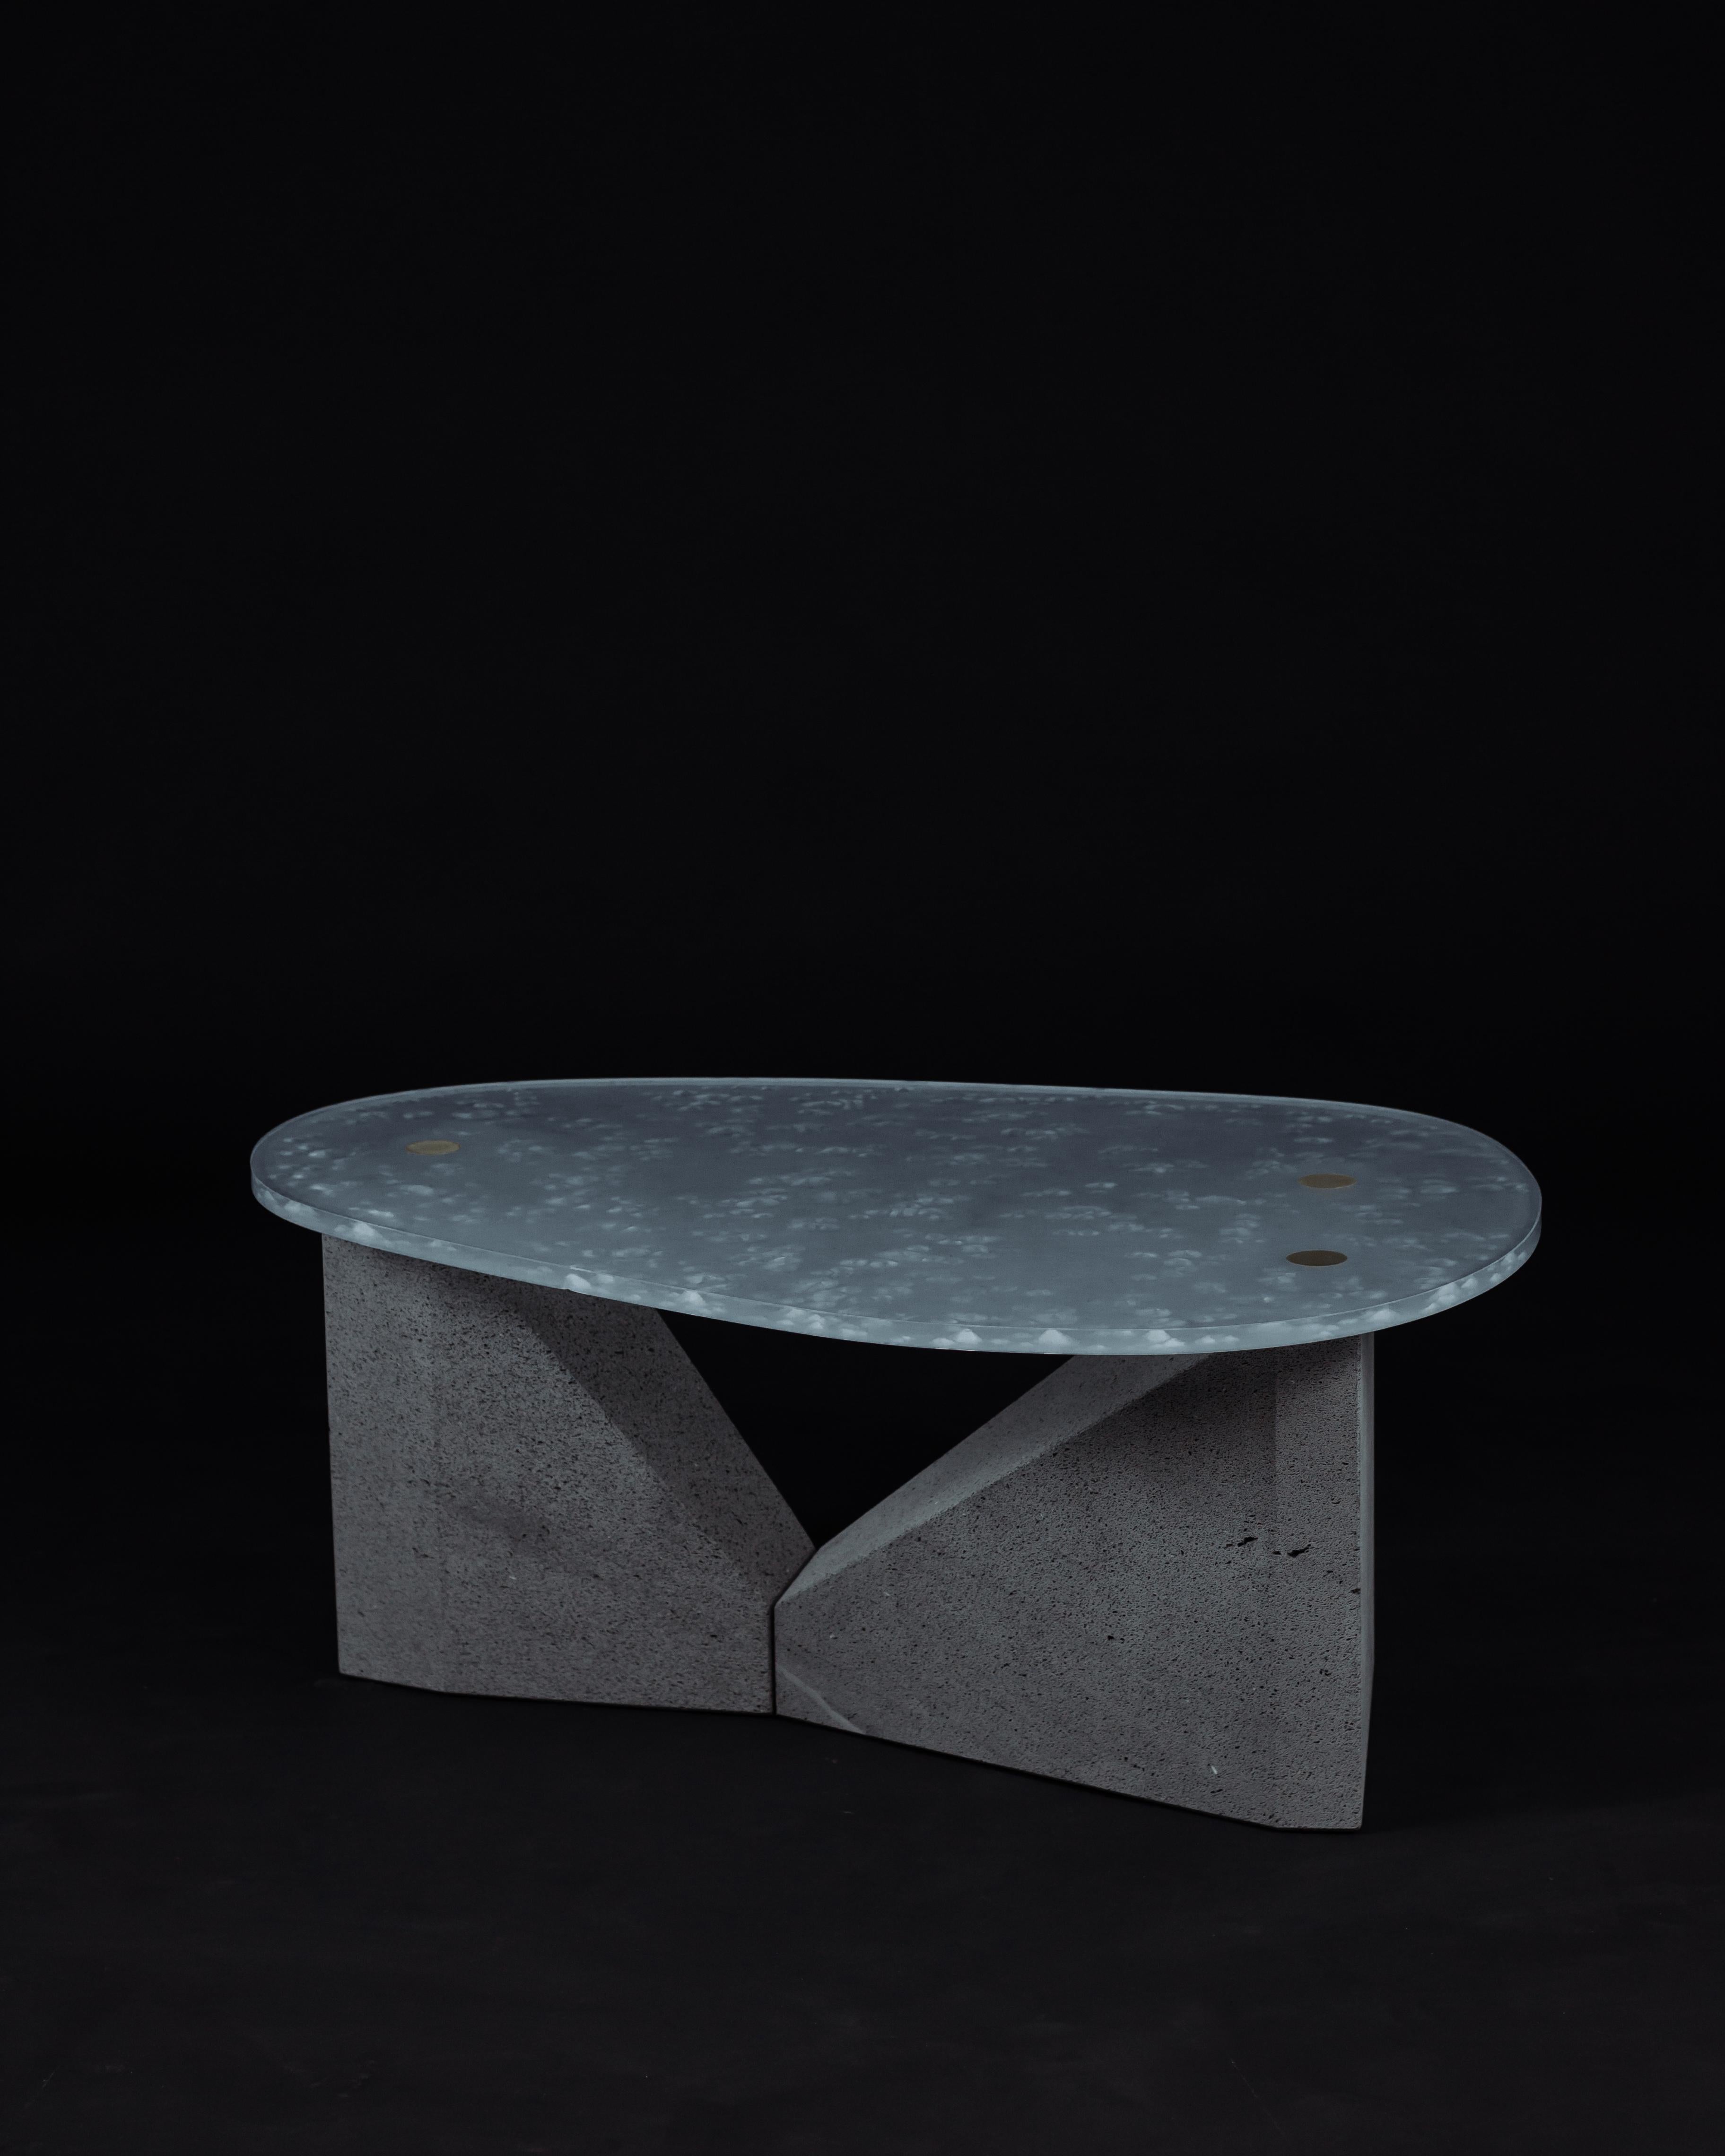 The Bel ava table draws its inspiration from mountain landscapes.
Glass is often associated with a cold material. So by pushing our experiments in this direction, we
in this direction that we have obtained this decor. The sandblasting, with its